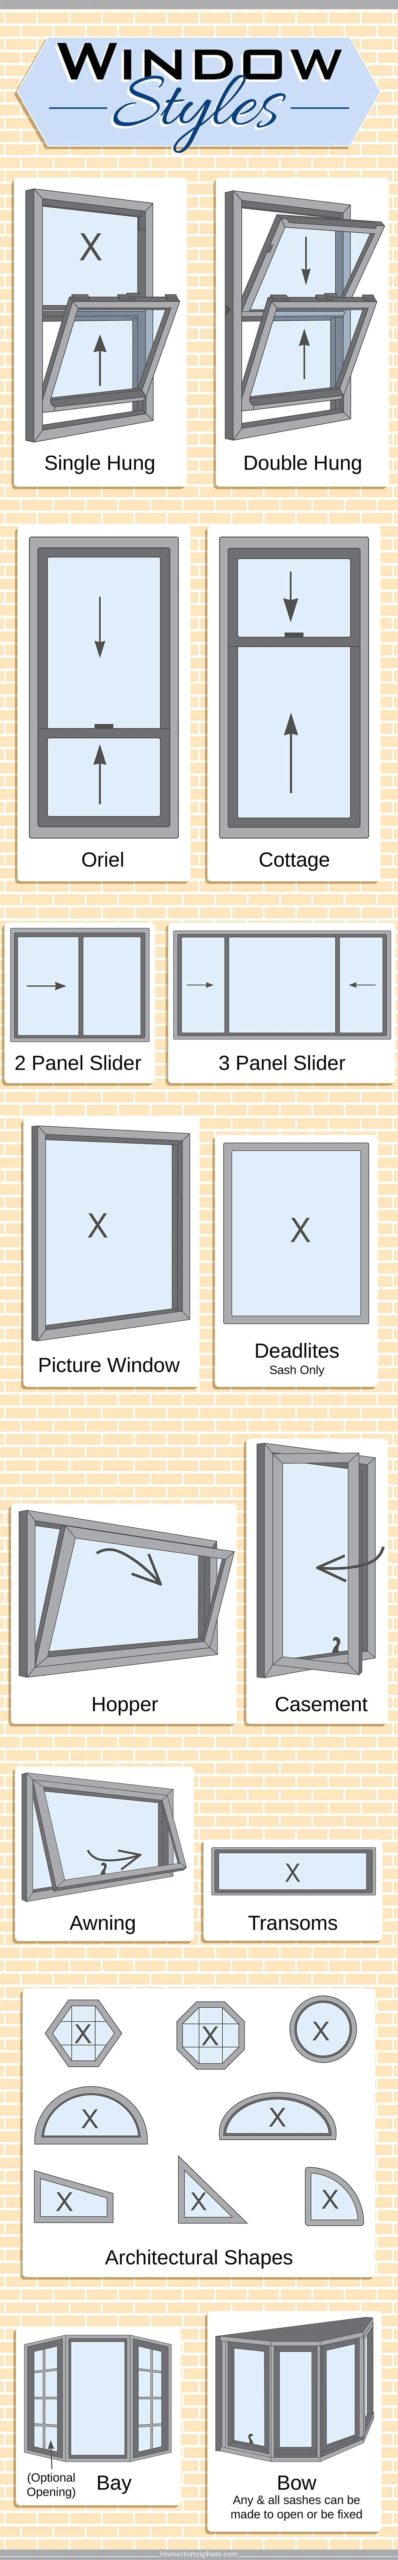 Different types of windows chart